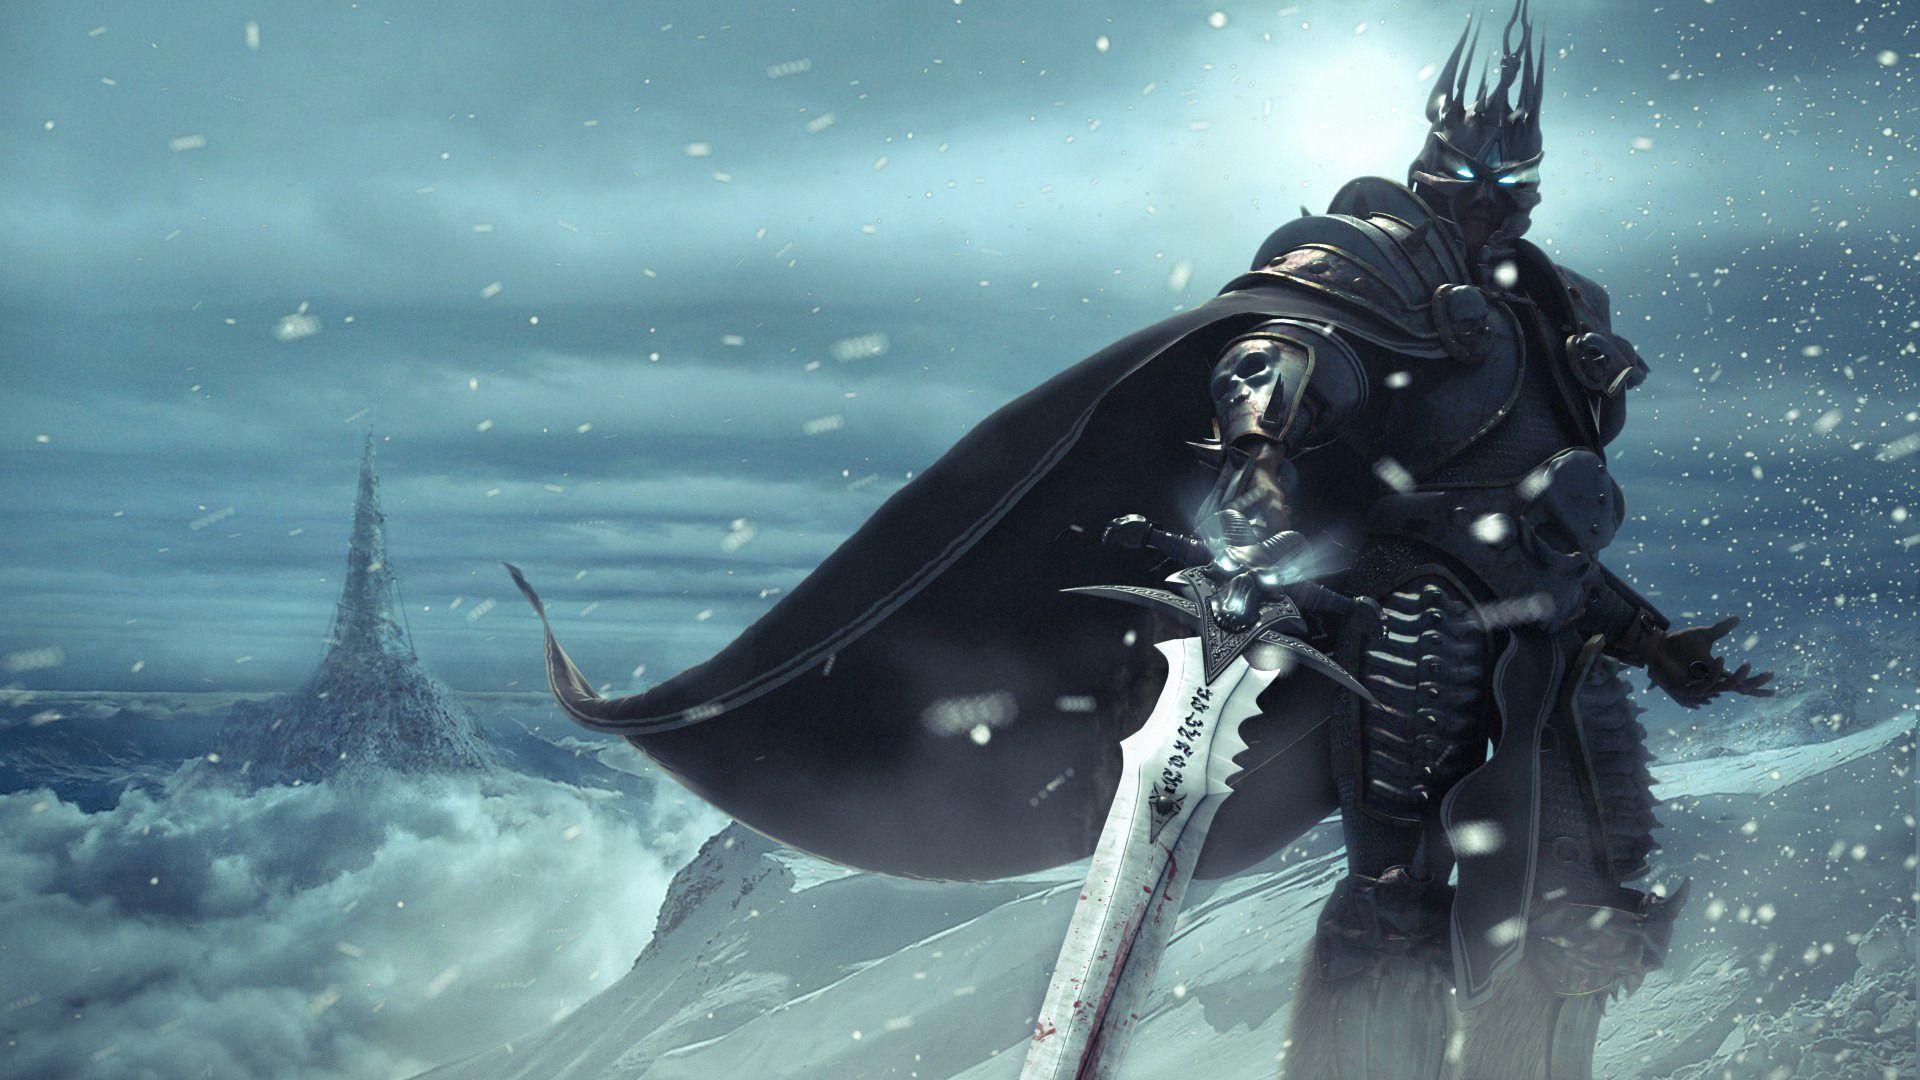 World of Warcraft Wrath of the Lich King wallpaper Game. HD